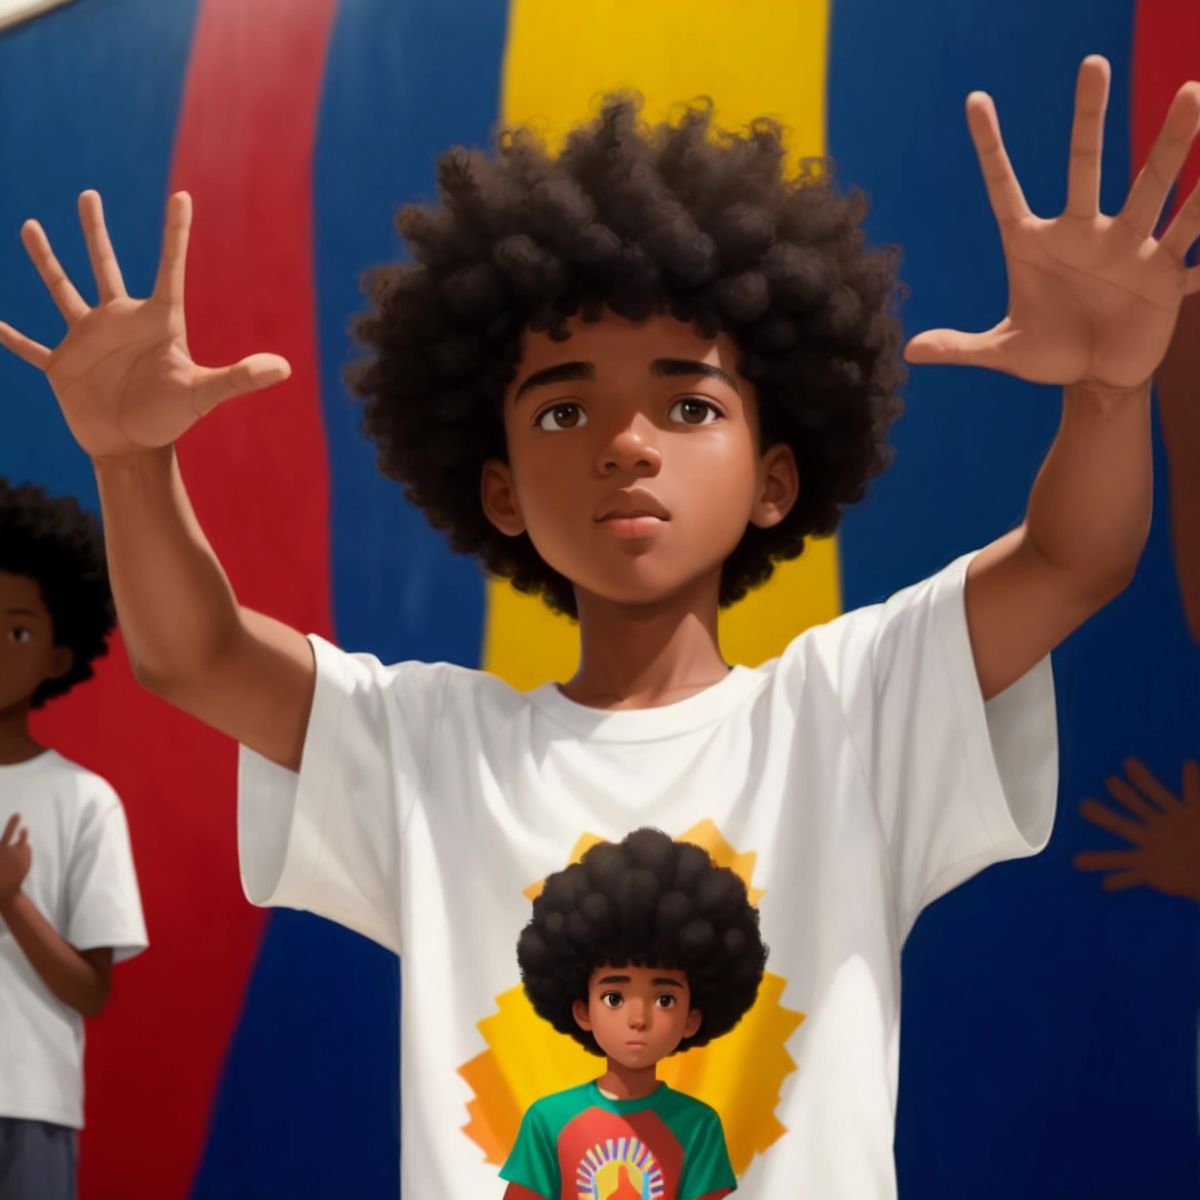 Sunshine standing with open arms, a mural of diverse hands signing behind him symbolizing unity.